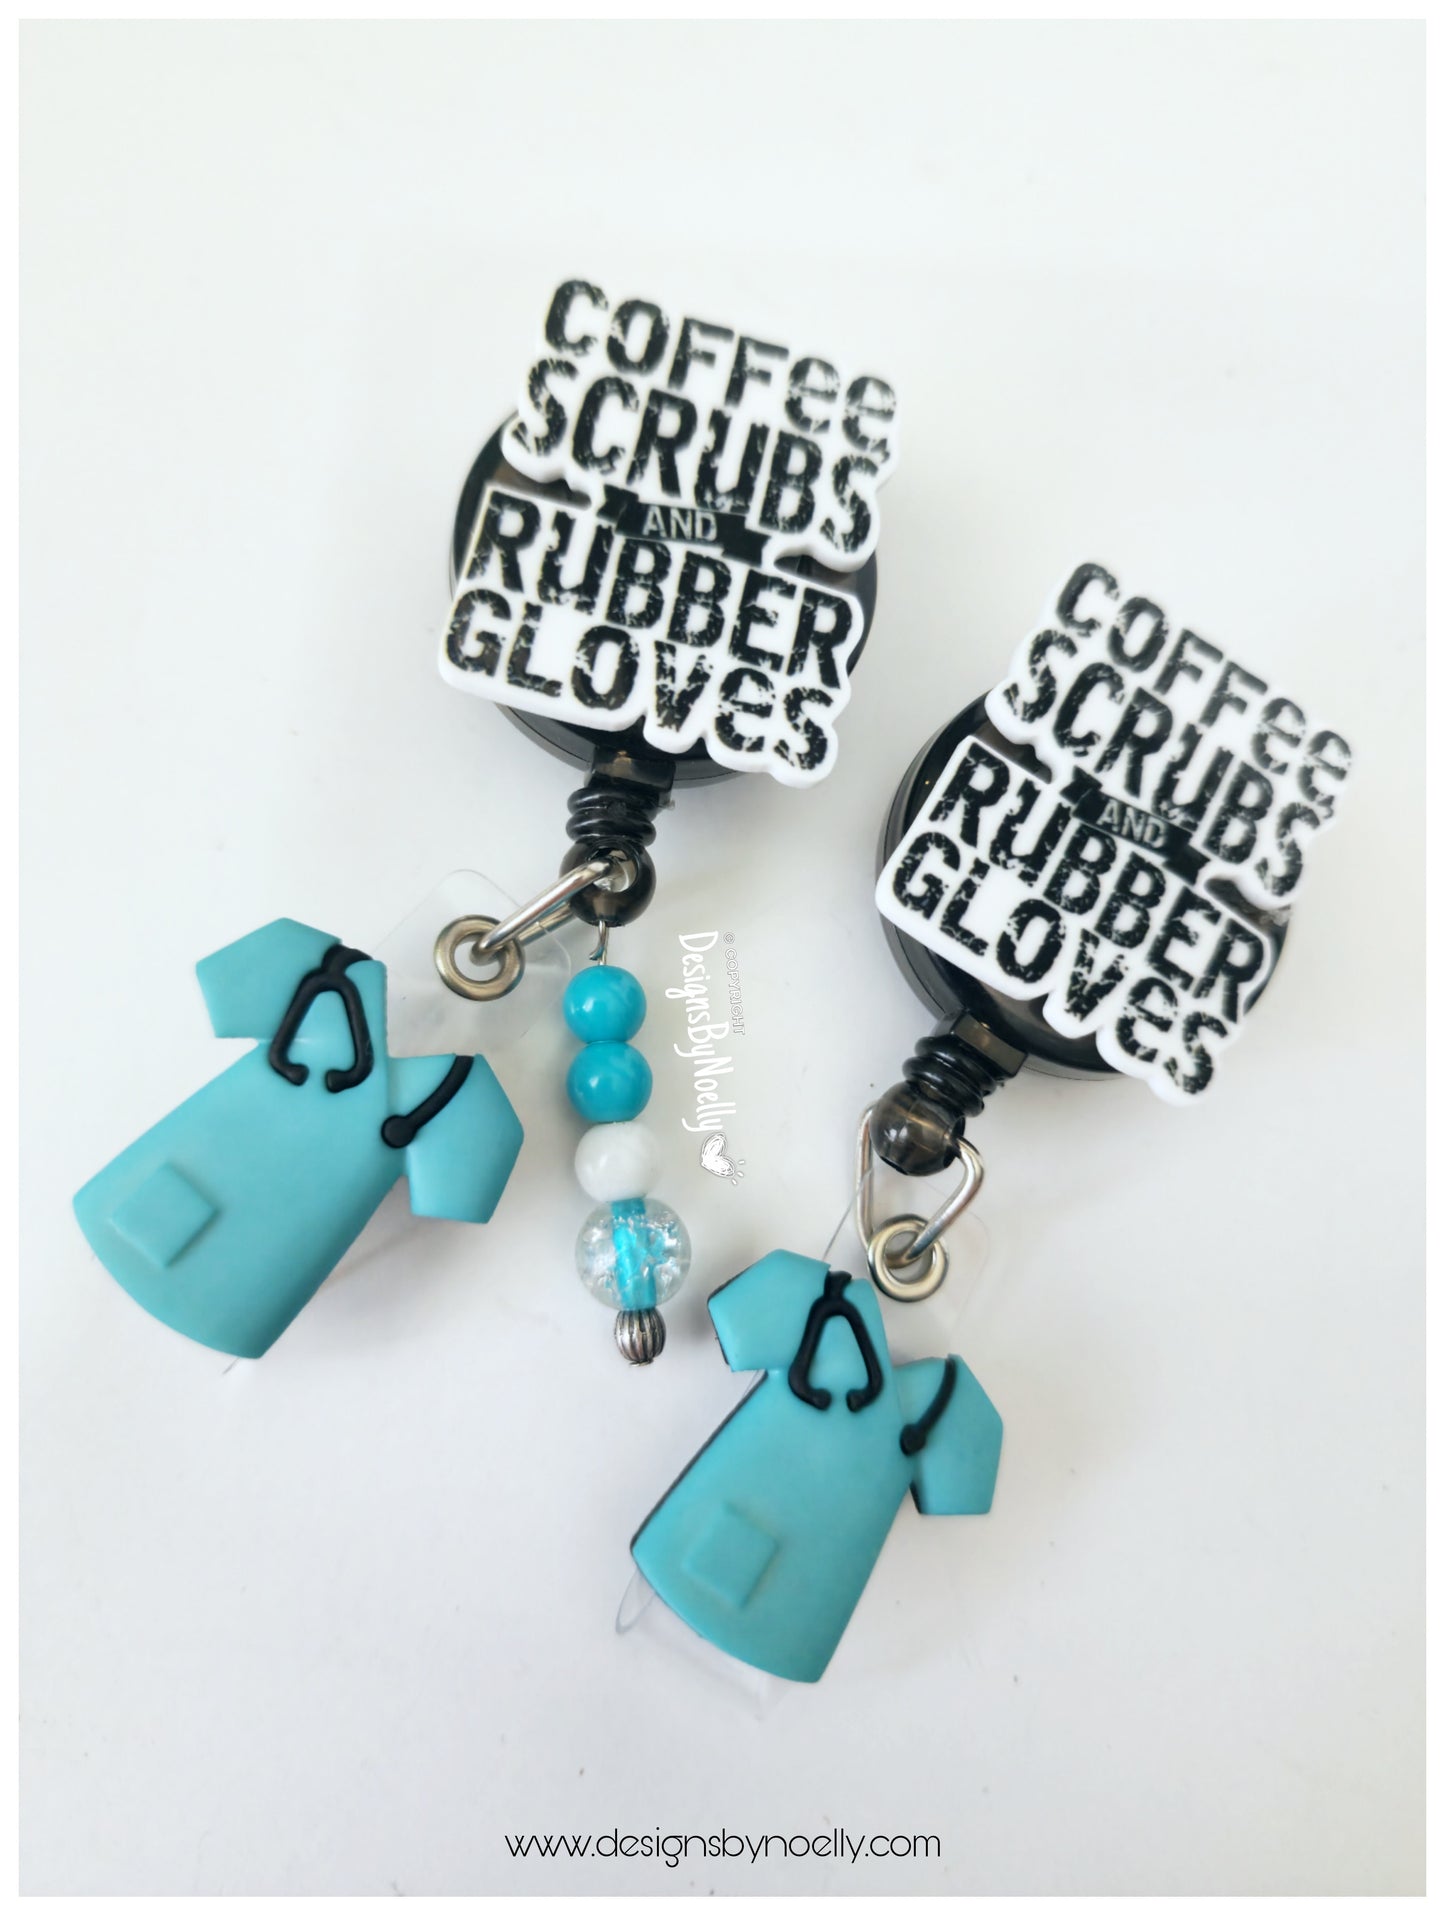 "Coffee, Scrubs, and Rubber Gloves" Badge Reel